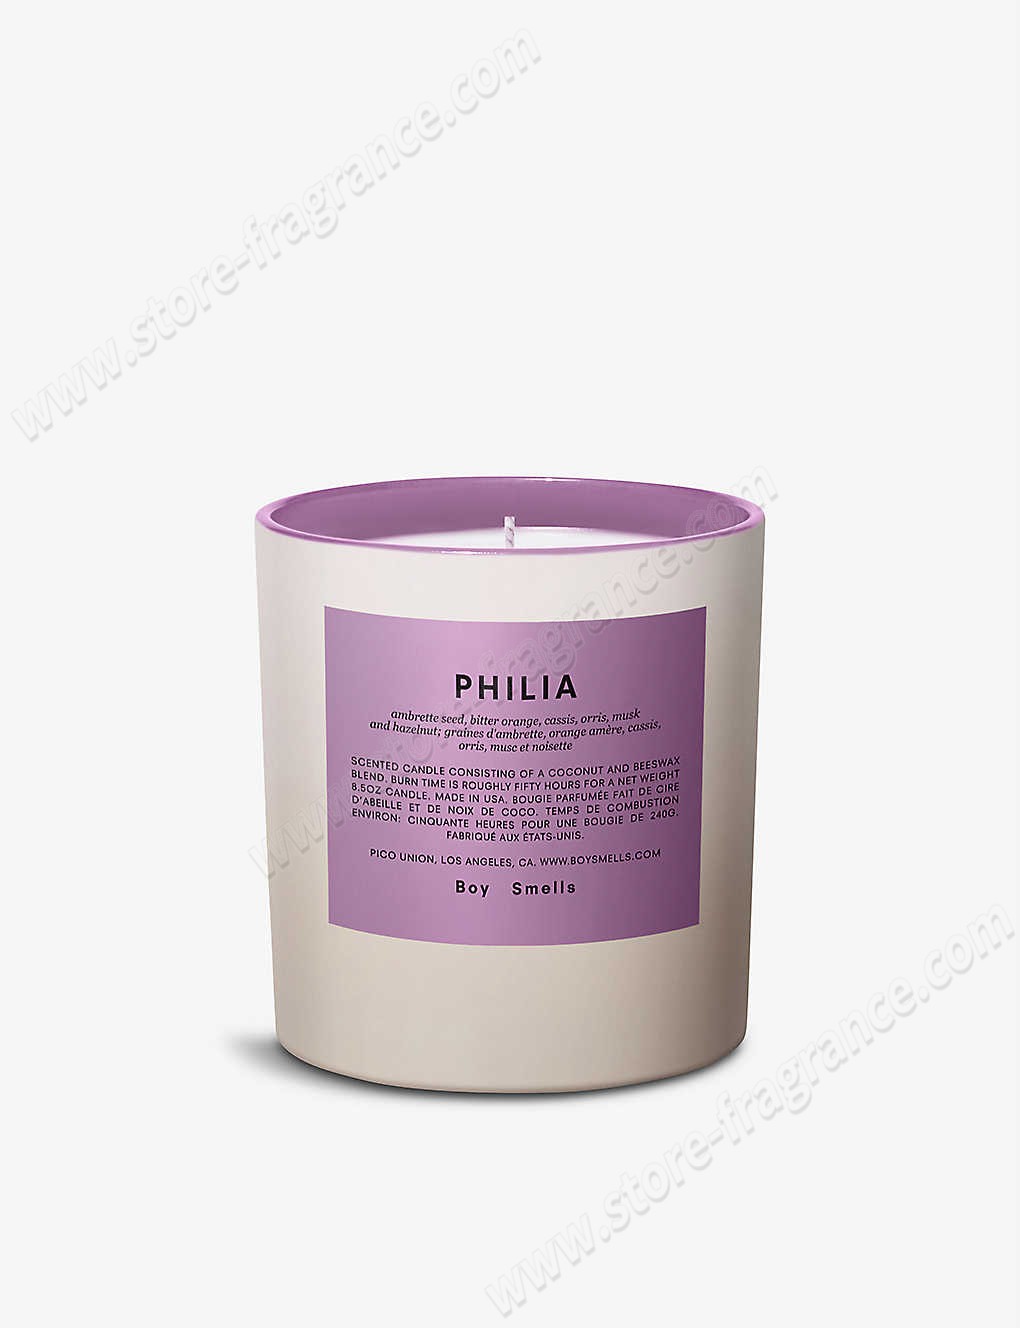 BOY SMELLS/Pride Philia scented candle 240g ✿ Discount Store - -0